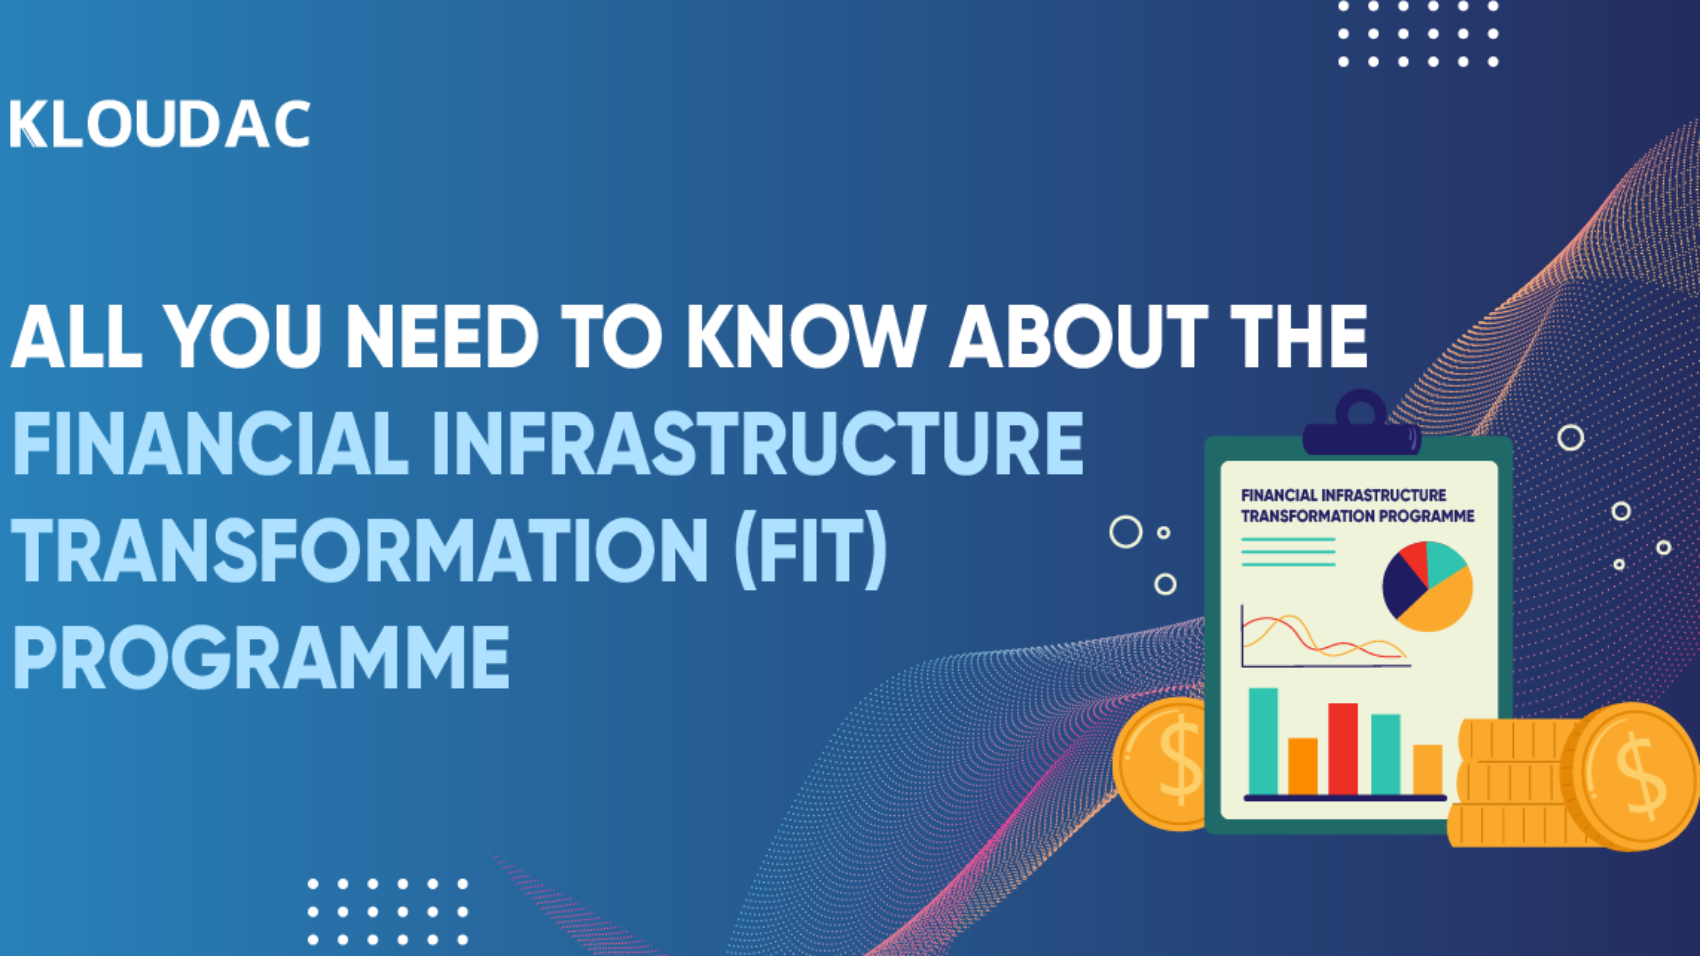 2. All you need to know about the Financial Infrastructure Transformation (FIT) program